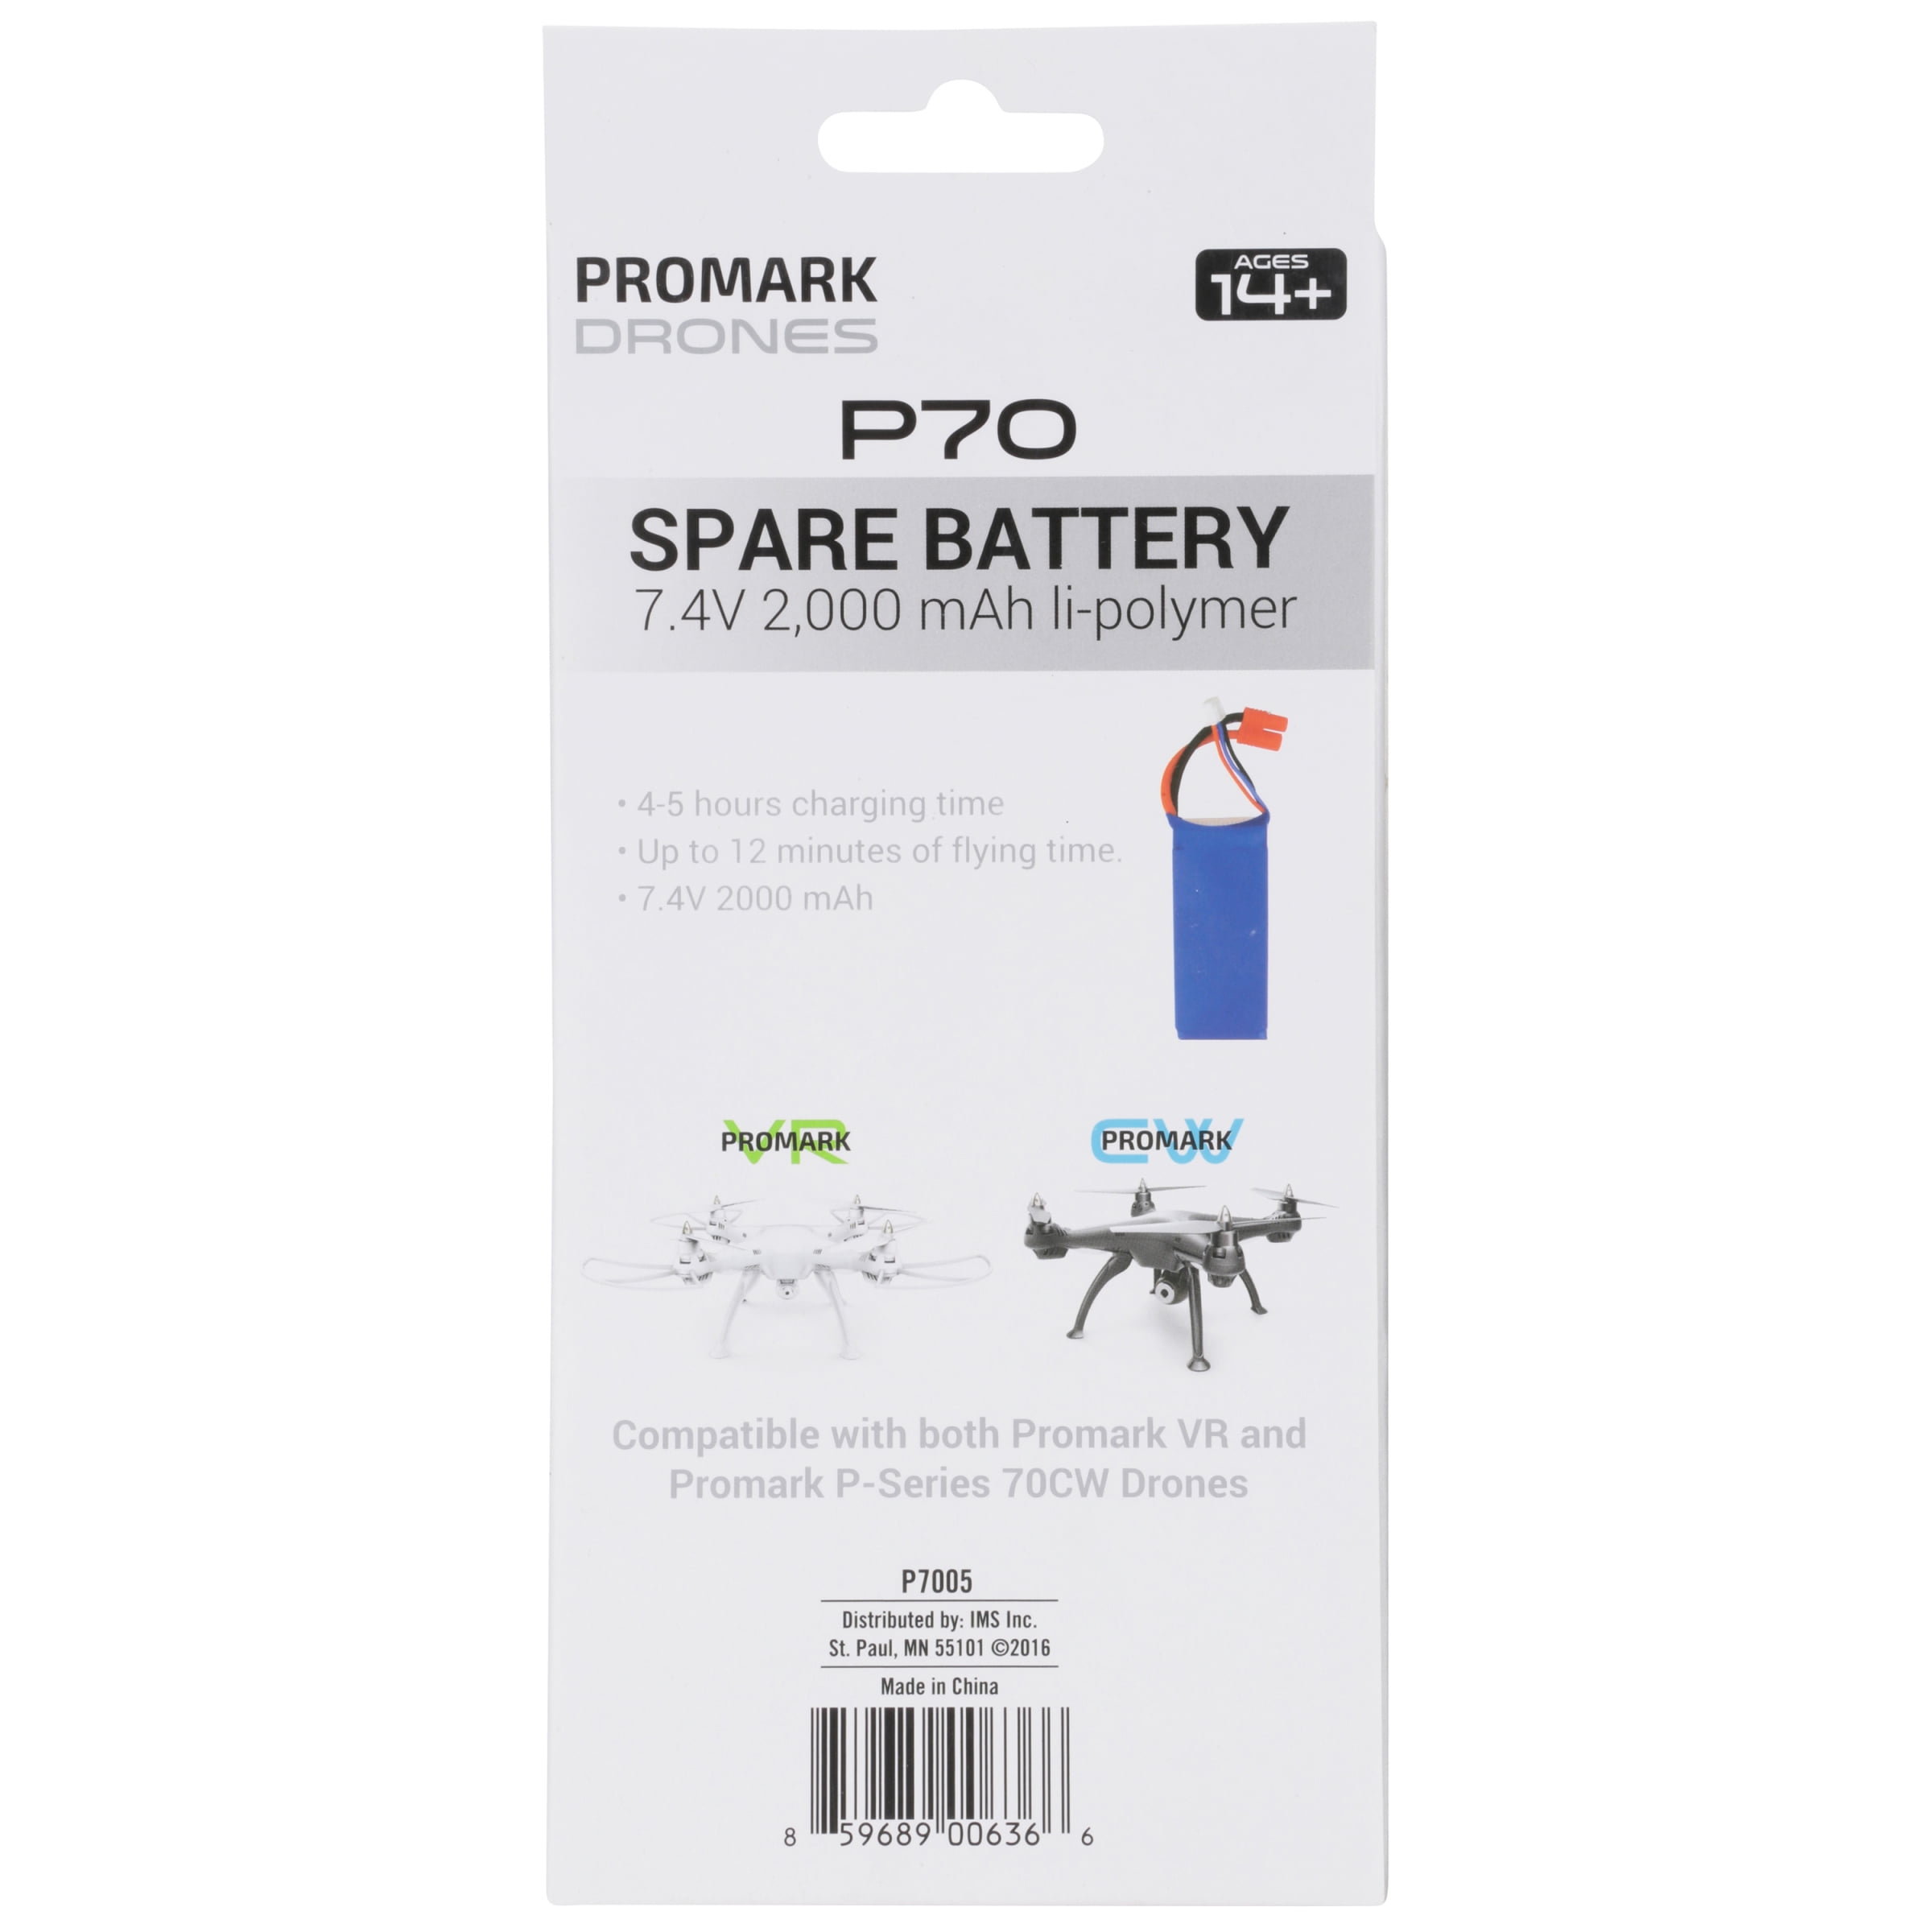 Promark P70 VR & CW Drone Battery More Flight Time 2000mah  POWER 2 PACK 